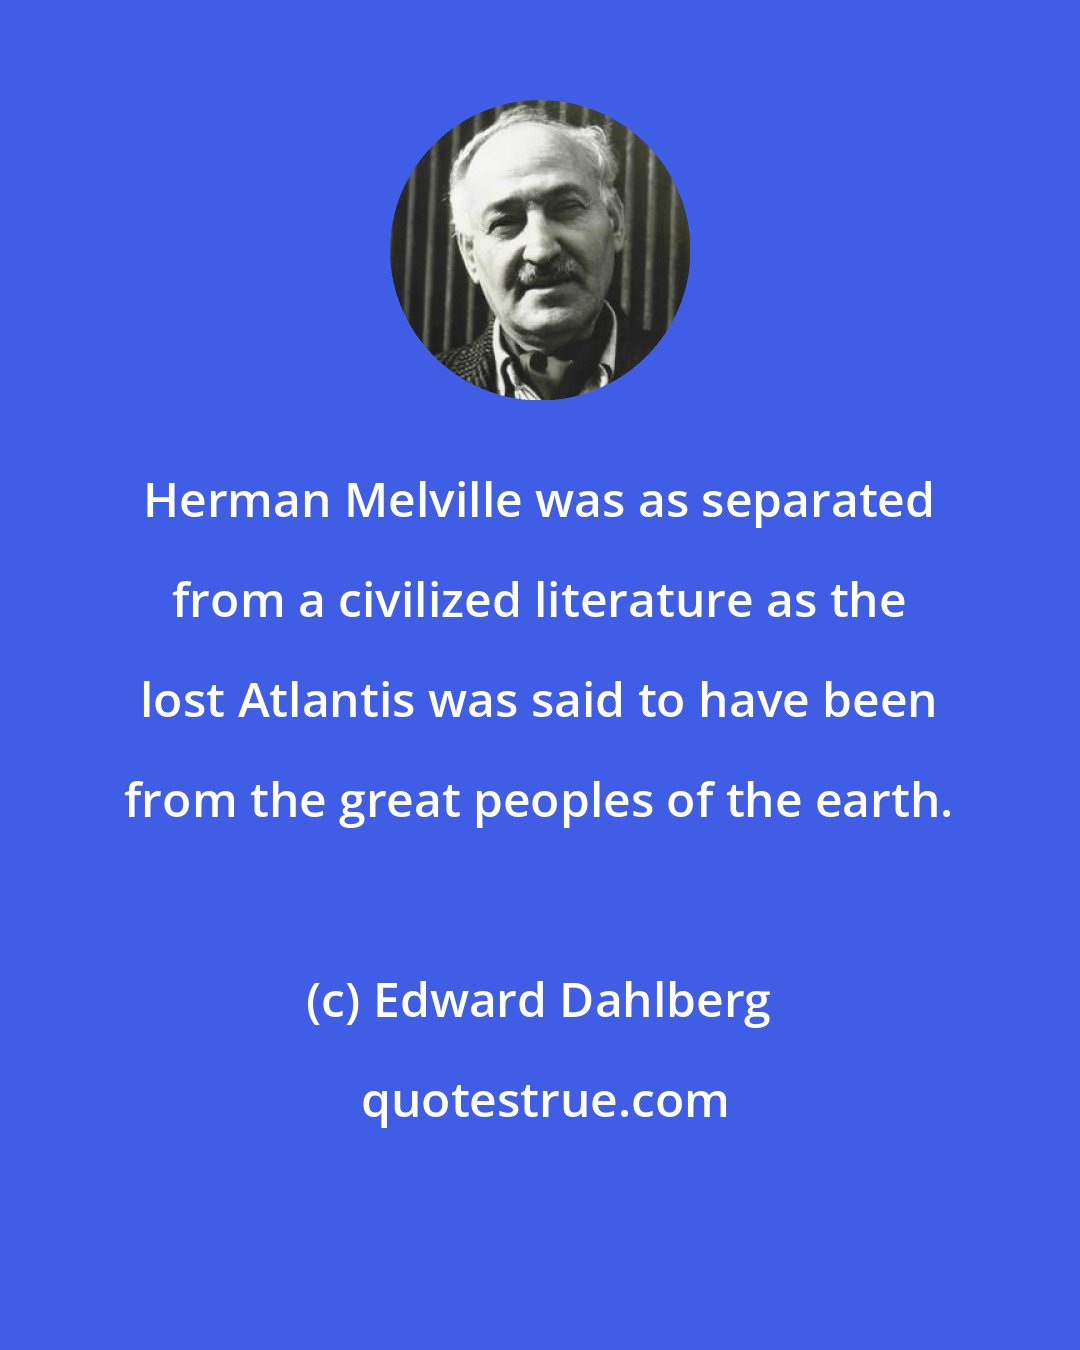 Edward Dahlberg: Herman Melville was as separated from a civilized literature as the lost Atlantis was said to have been from the great peoples of the earth.